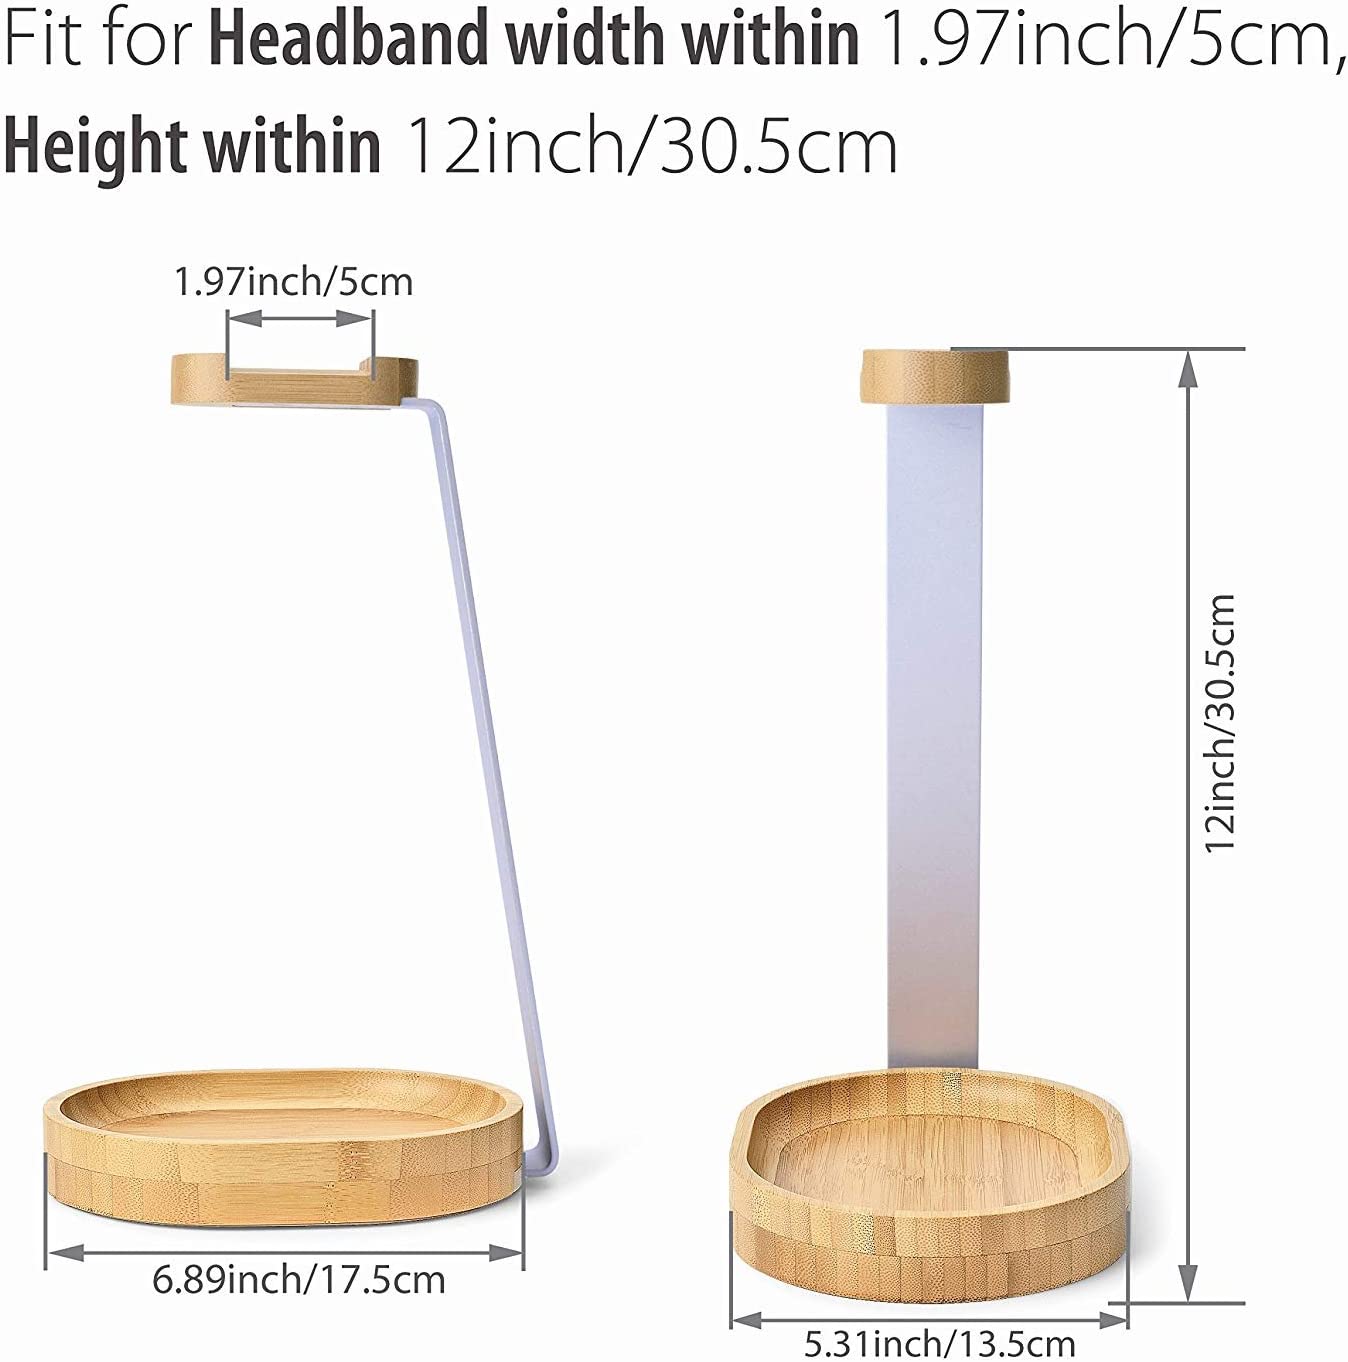 Size measurements for a wooden headphone stand. The height is 12 inches, the width is 5.31 inches and the depth is 6.89 inches.